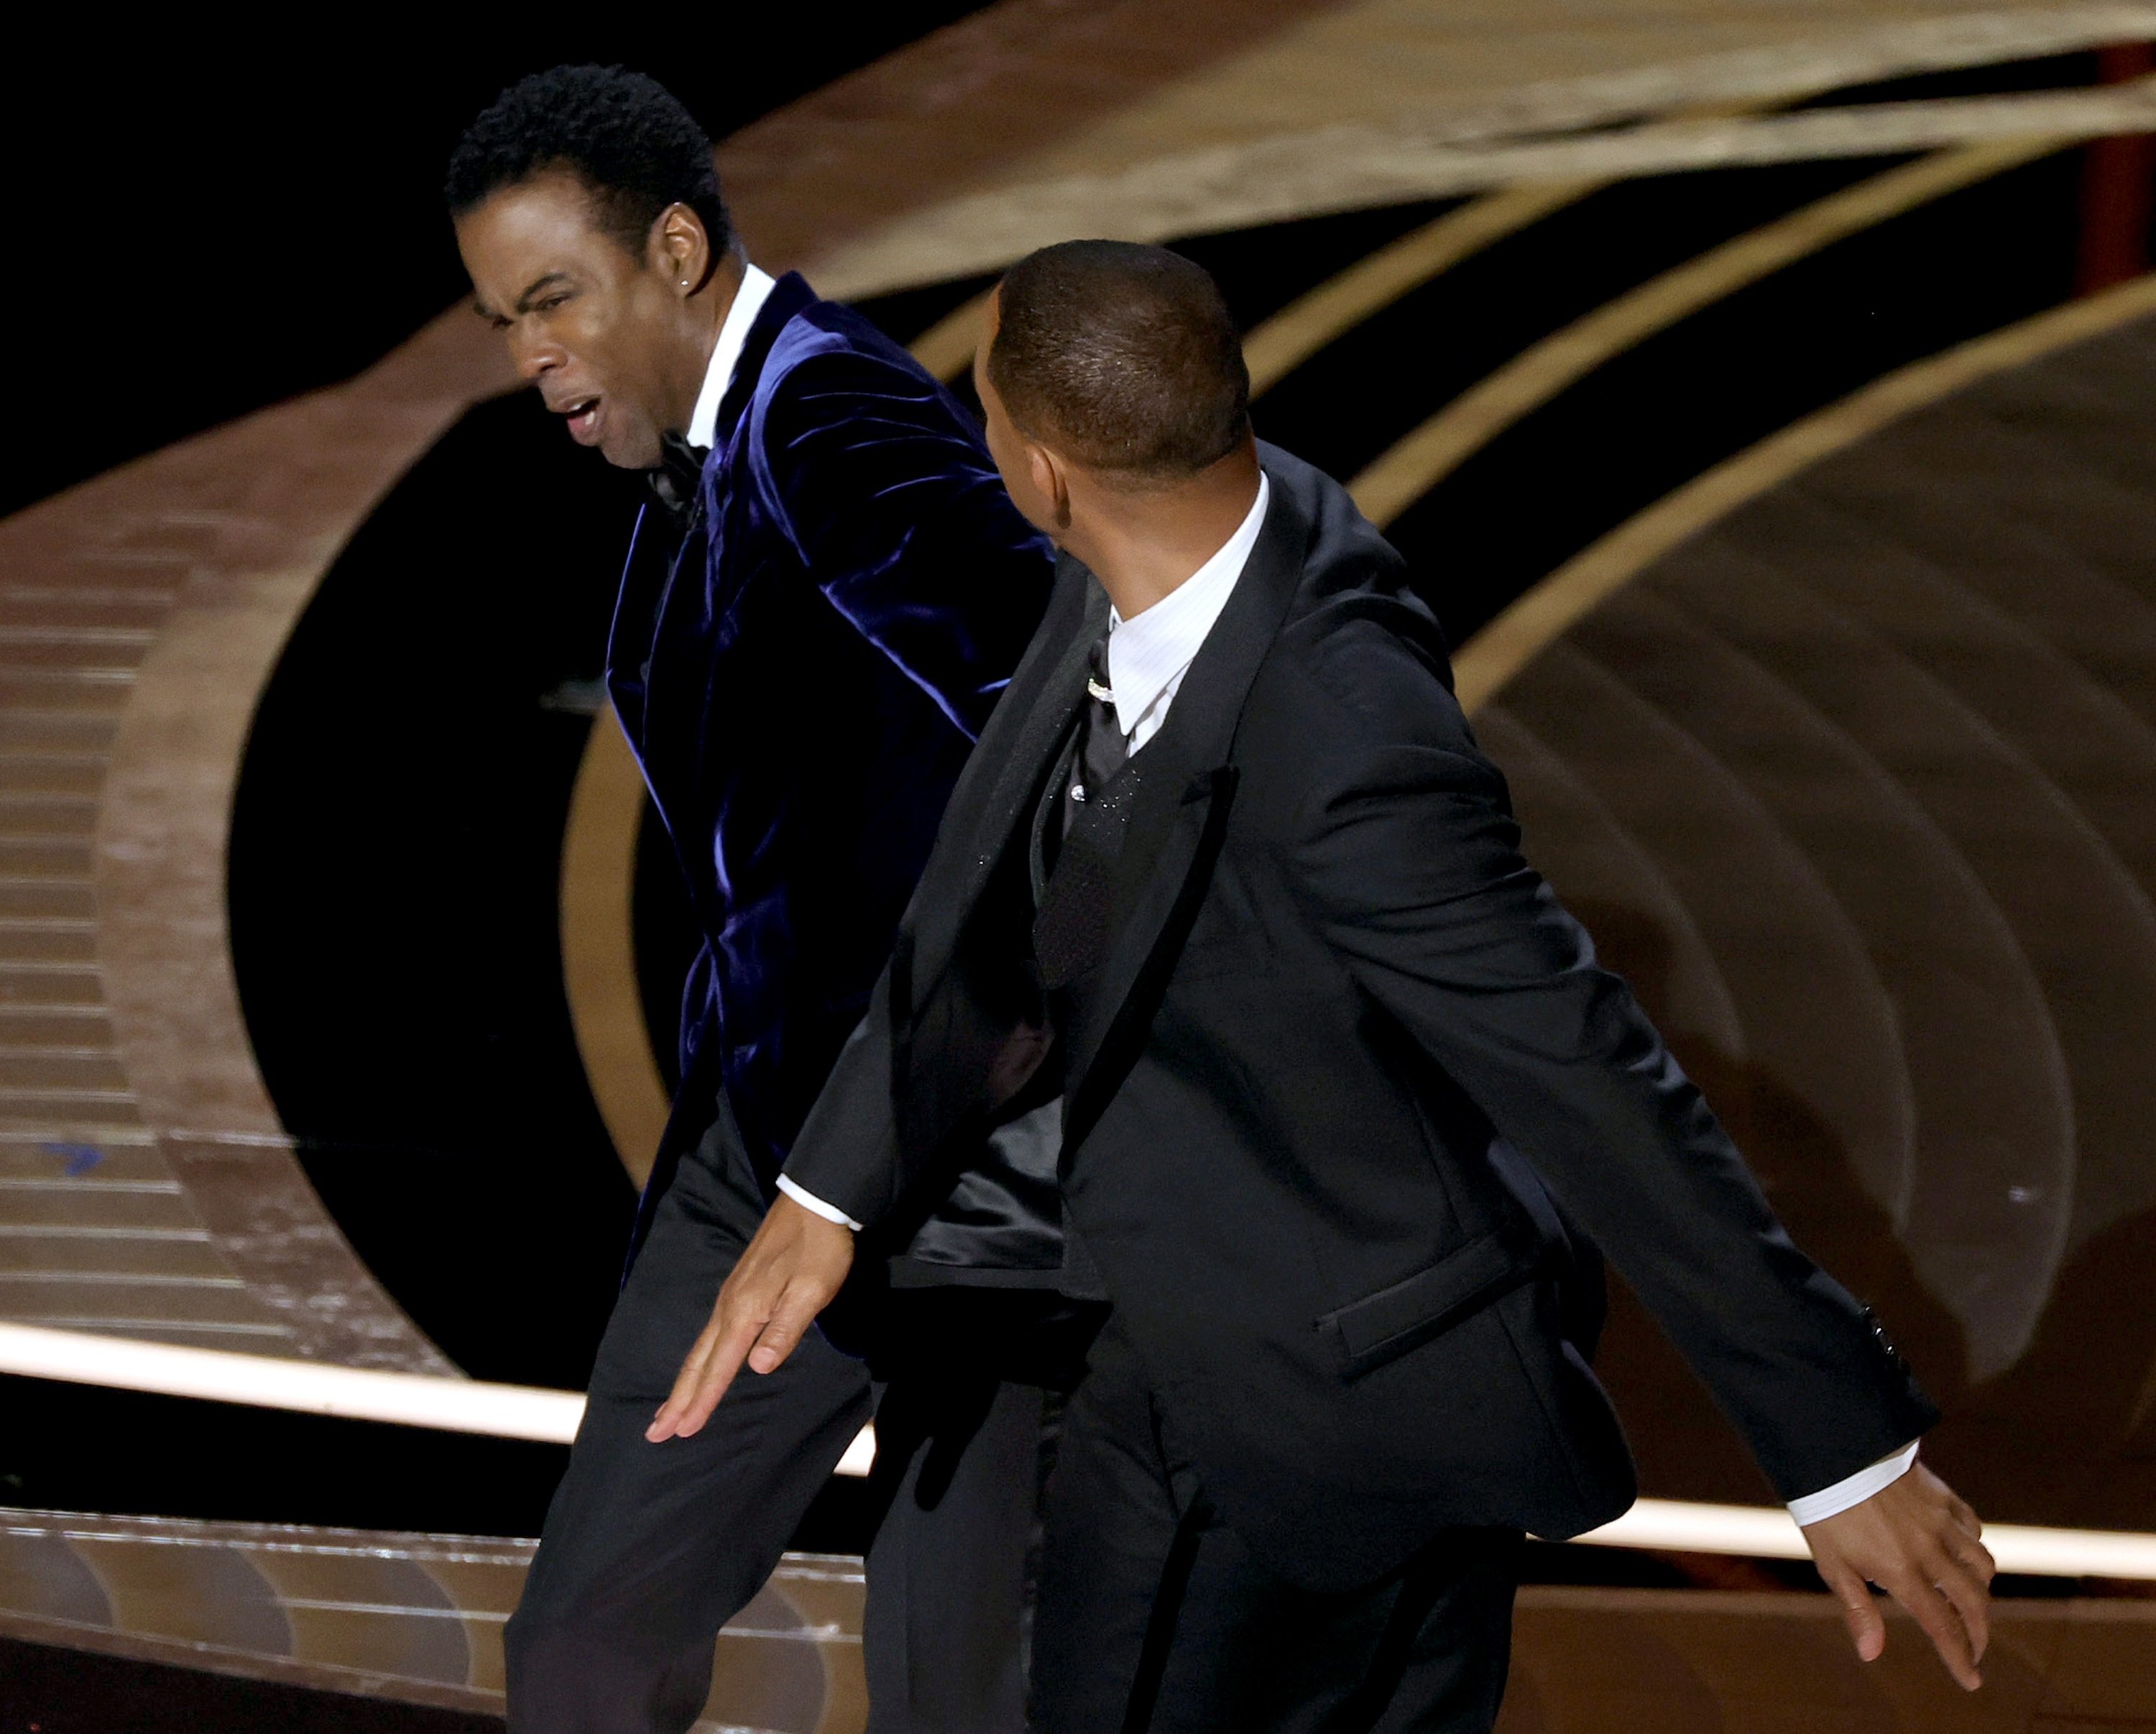 Chris Rock leaning over as Will Smith's hand comes back from hitting the comedian